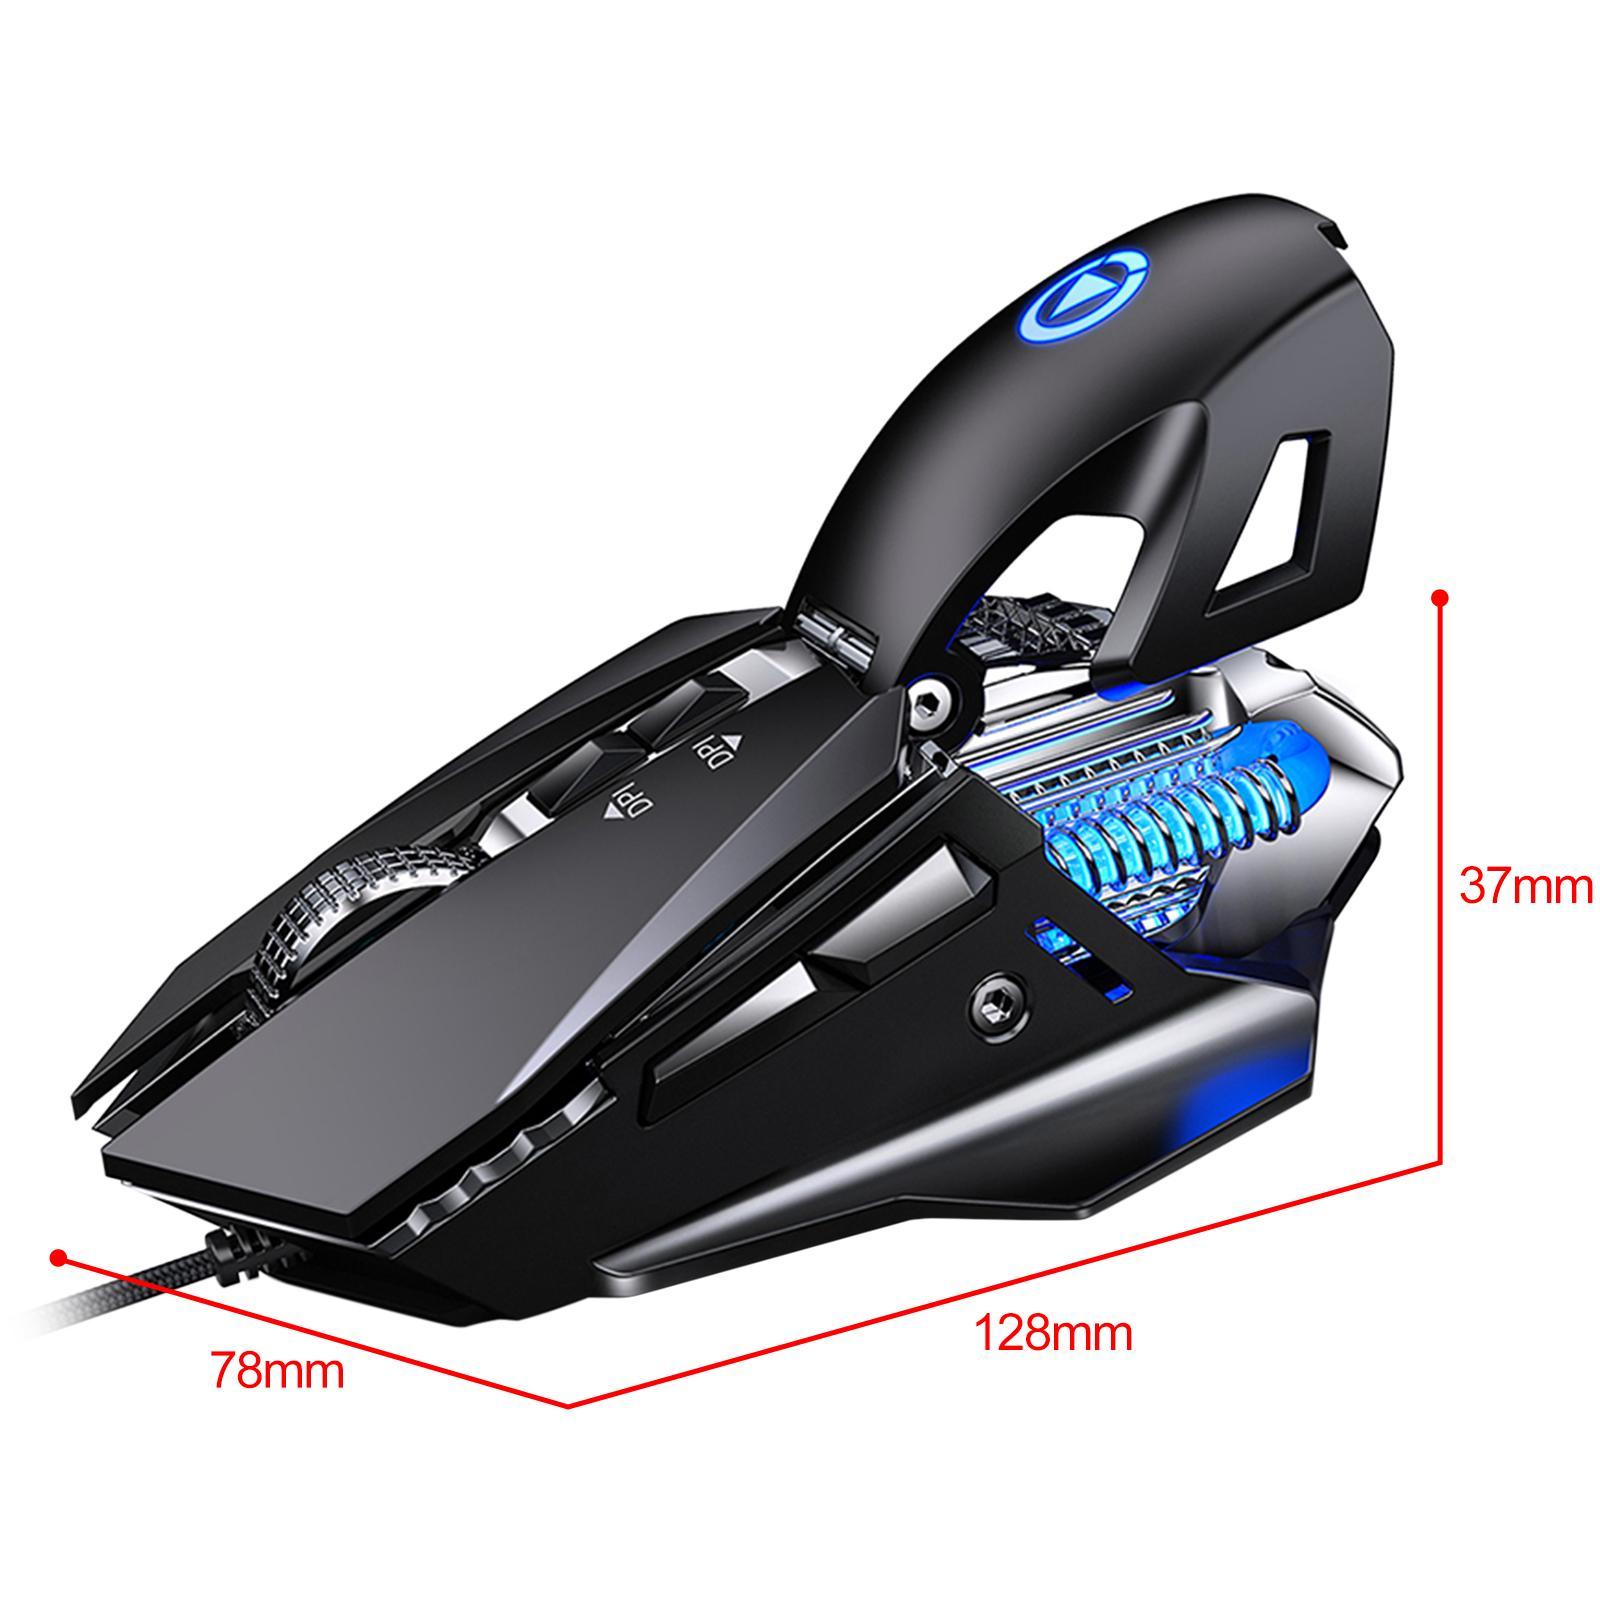 Mechanical Gaming Mouse Adjustable DPI up to 7200 Lighting Full Keys 7 Buttons